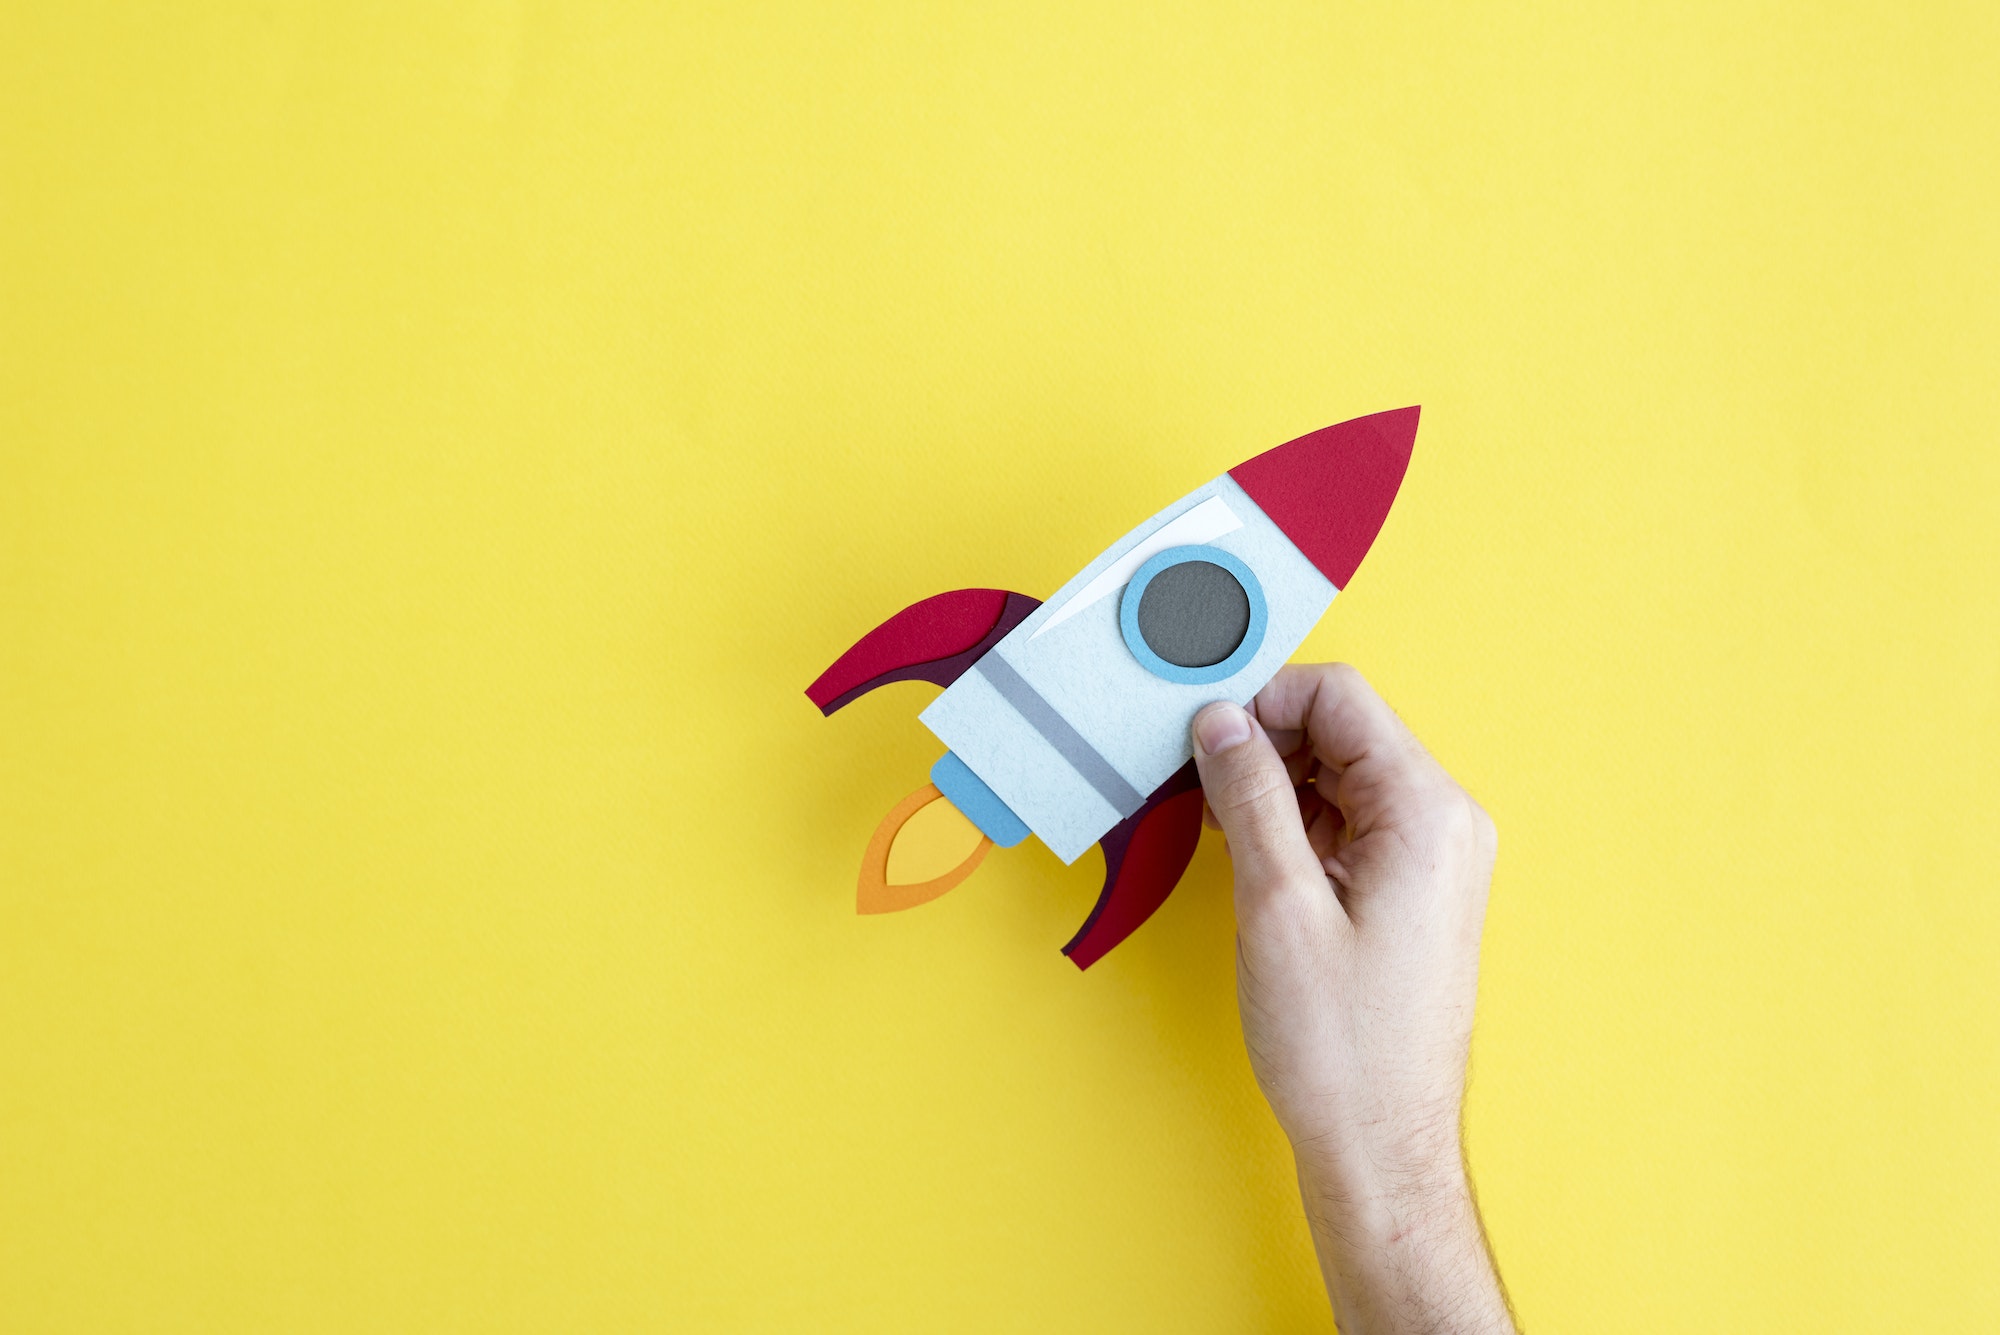 Hand Holding Rocket Spaceship on Yellow Background